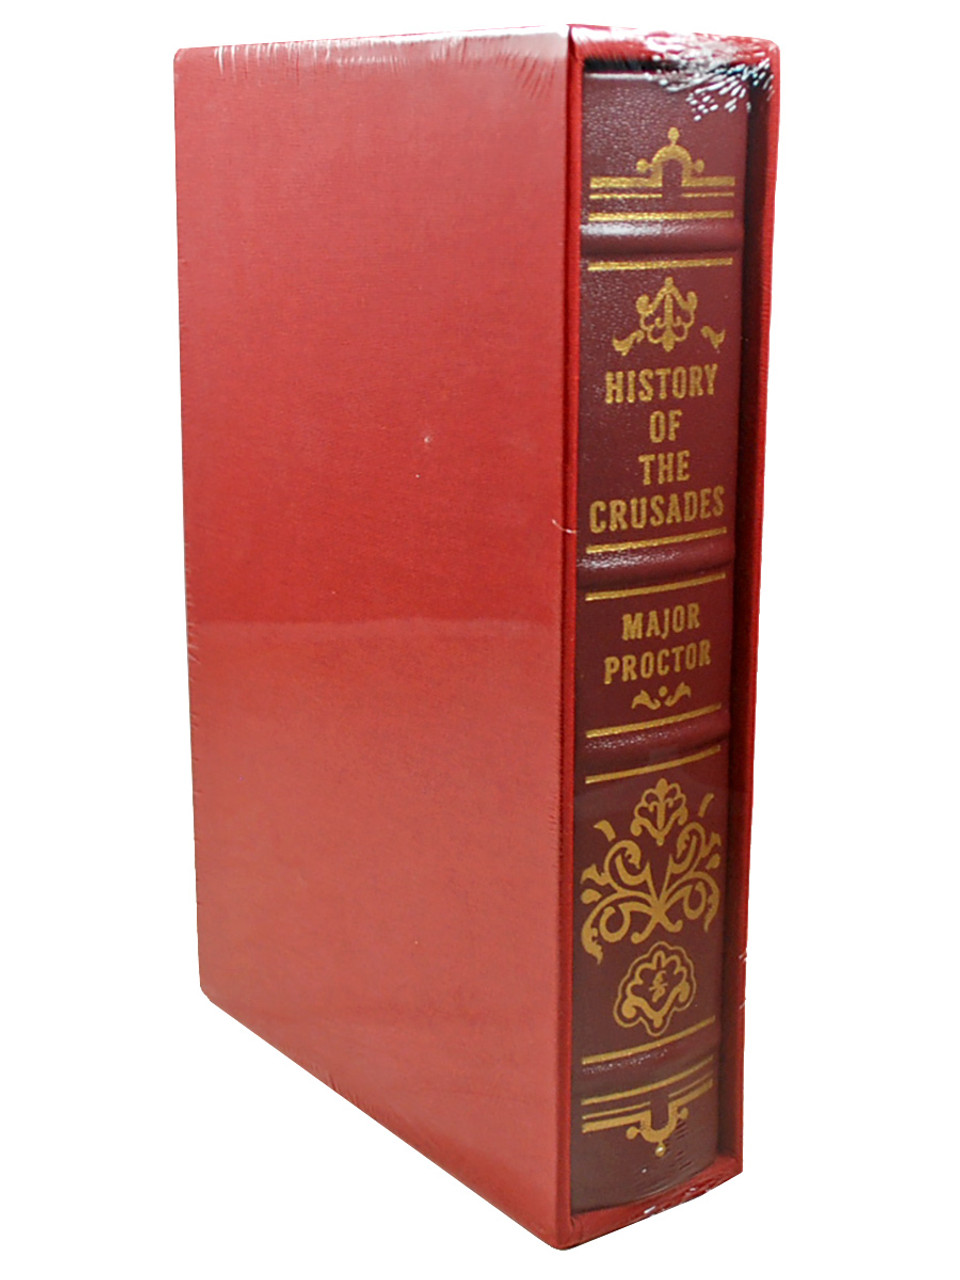 Major Proctor "History Of The Crusades" Limited Edition, Leather Bound Collector's Edition of only 600, Slipcased [Sealed]